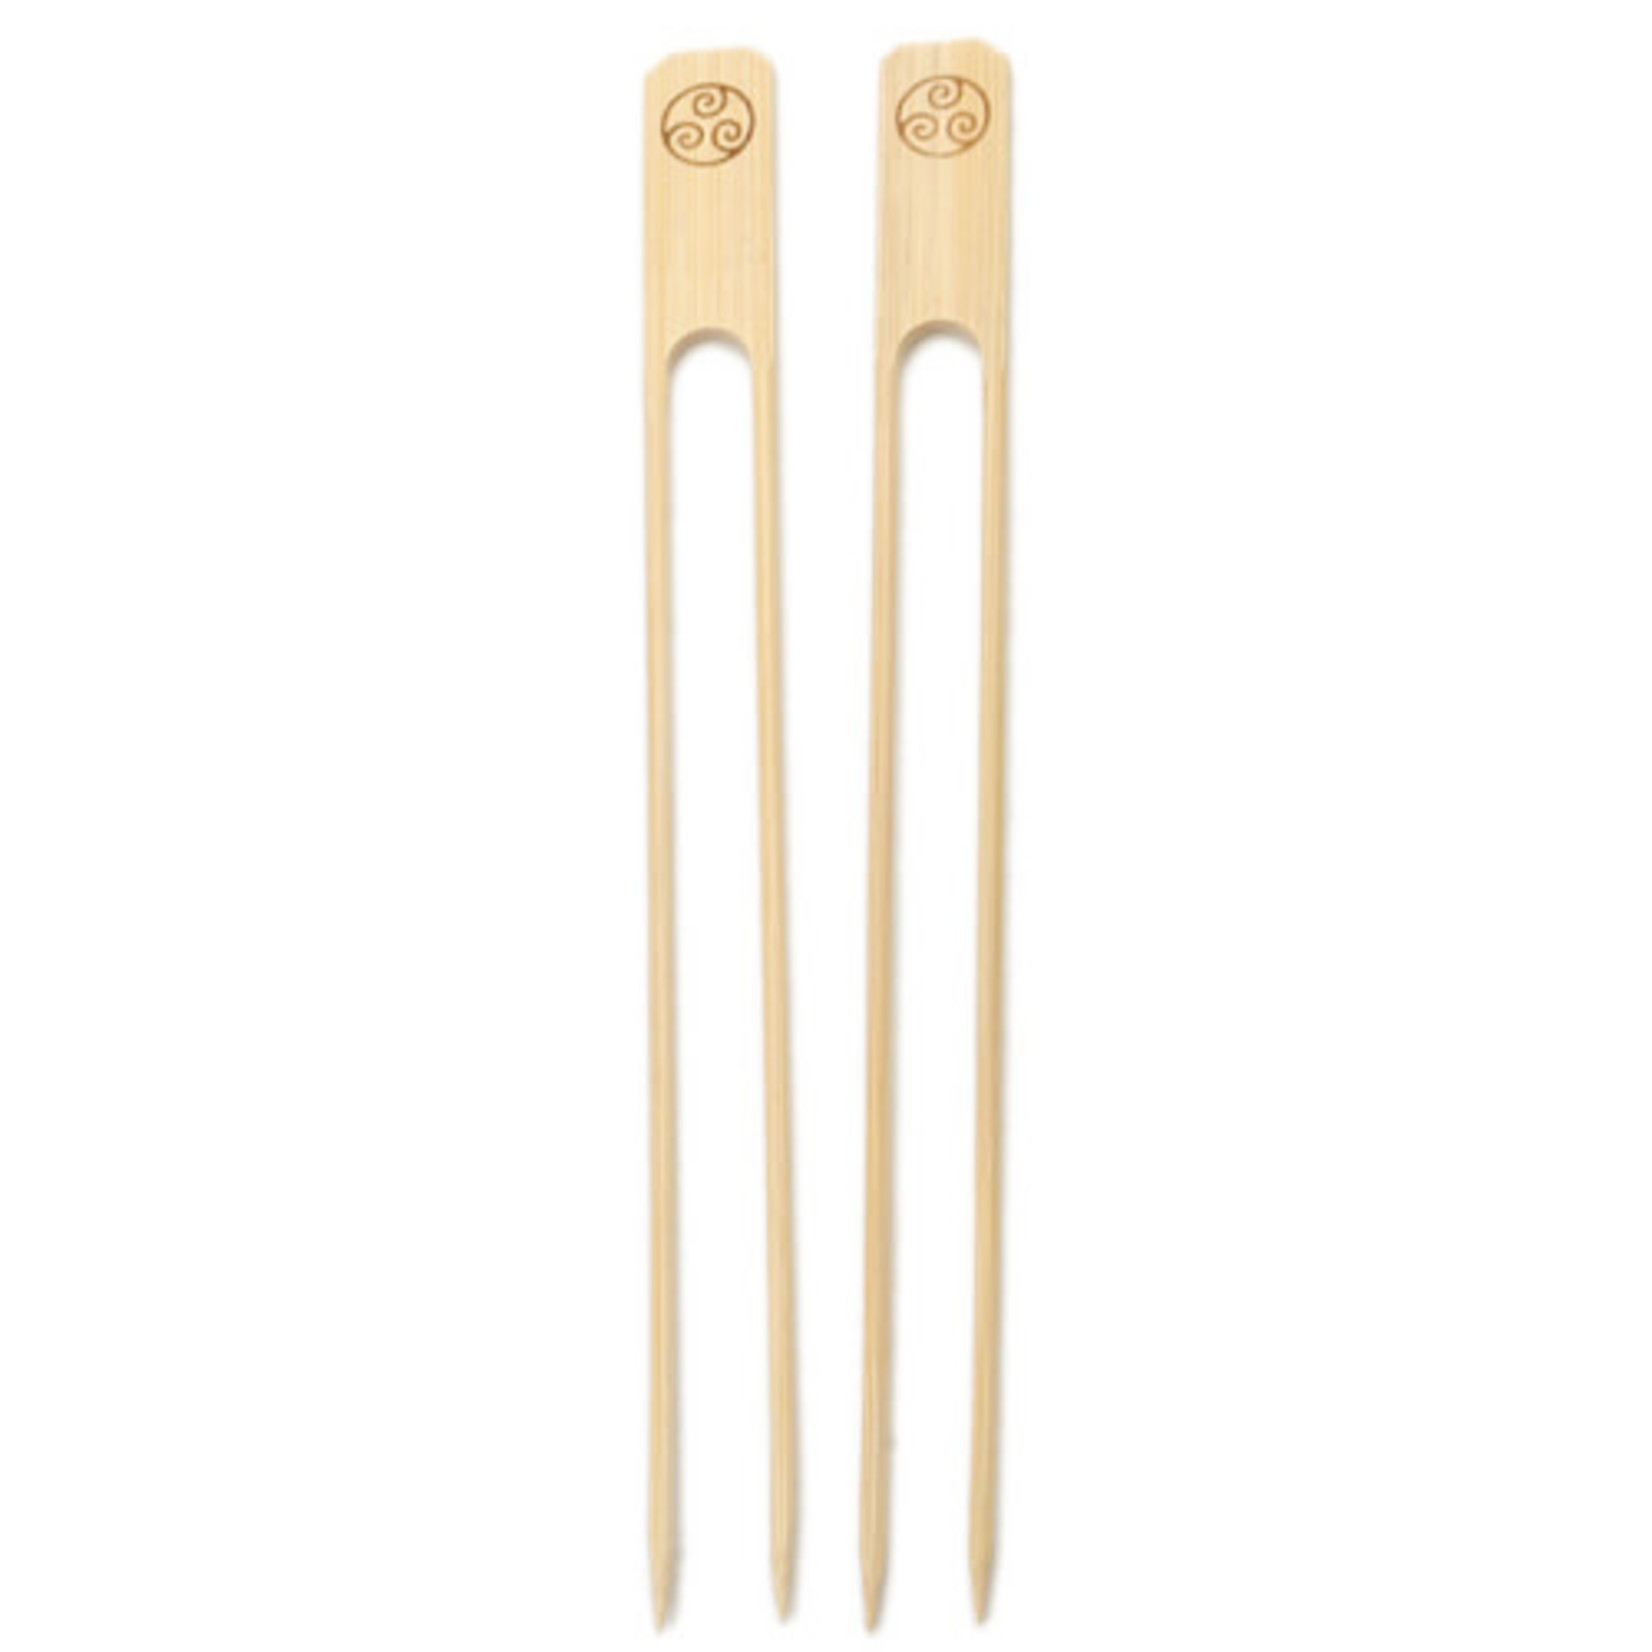 RSVP Bamboo Double Skewer